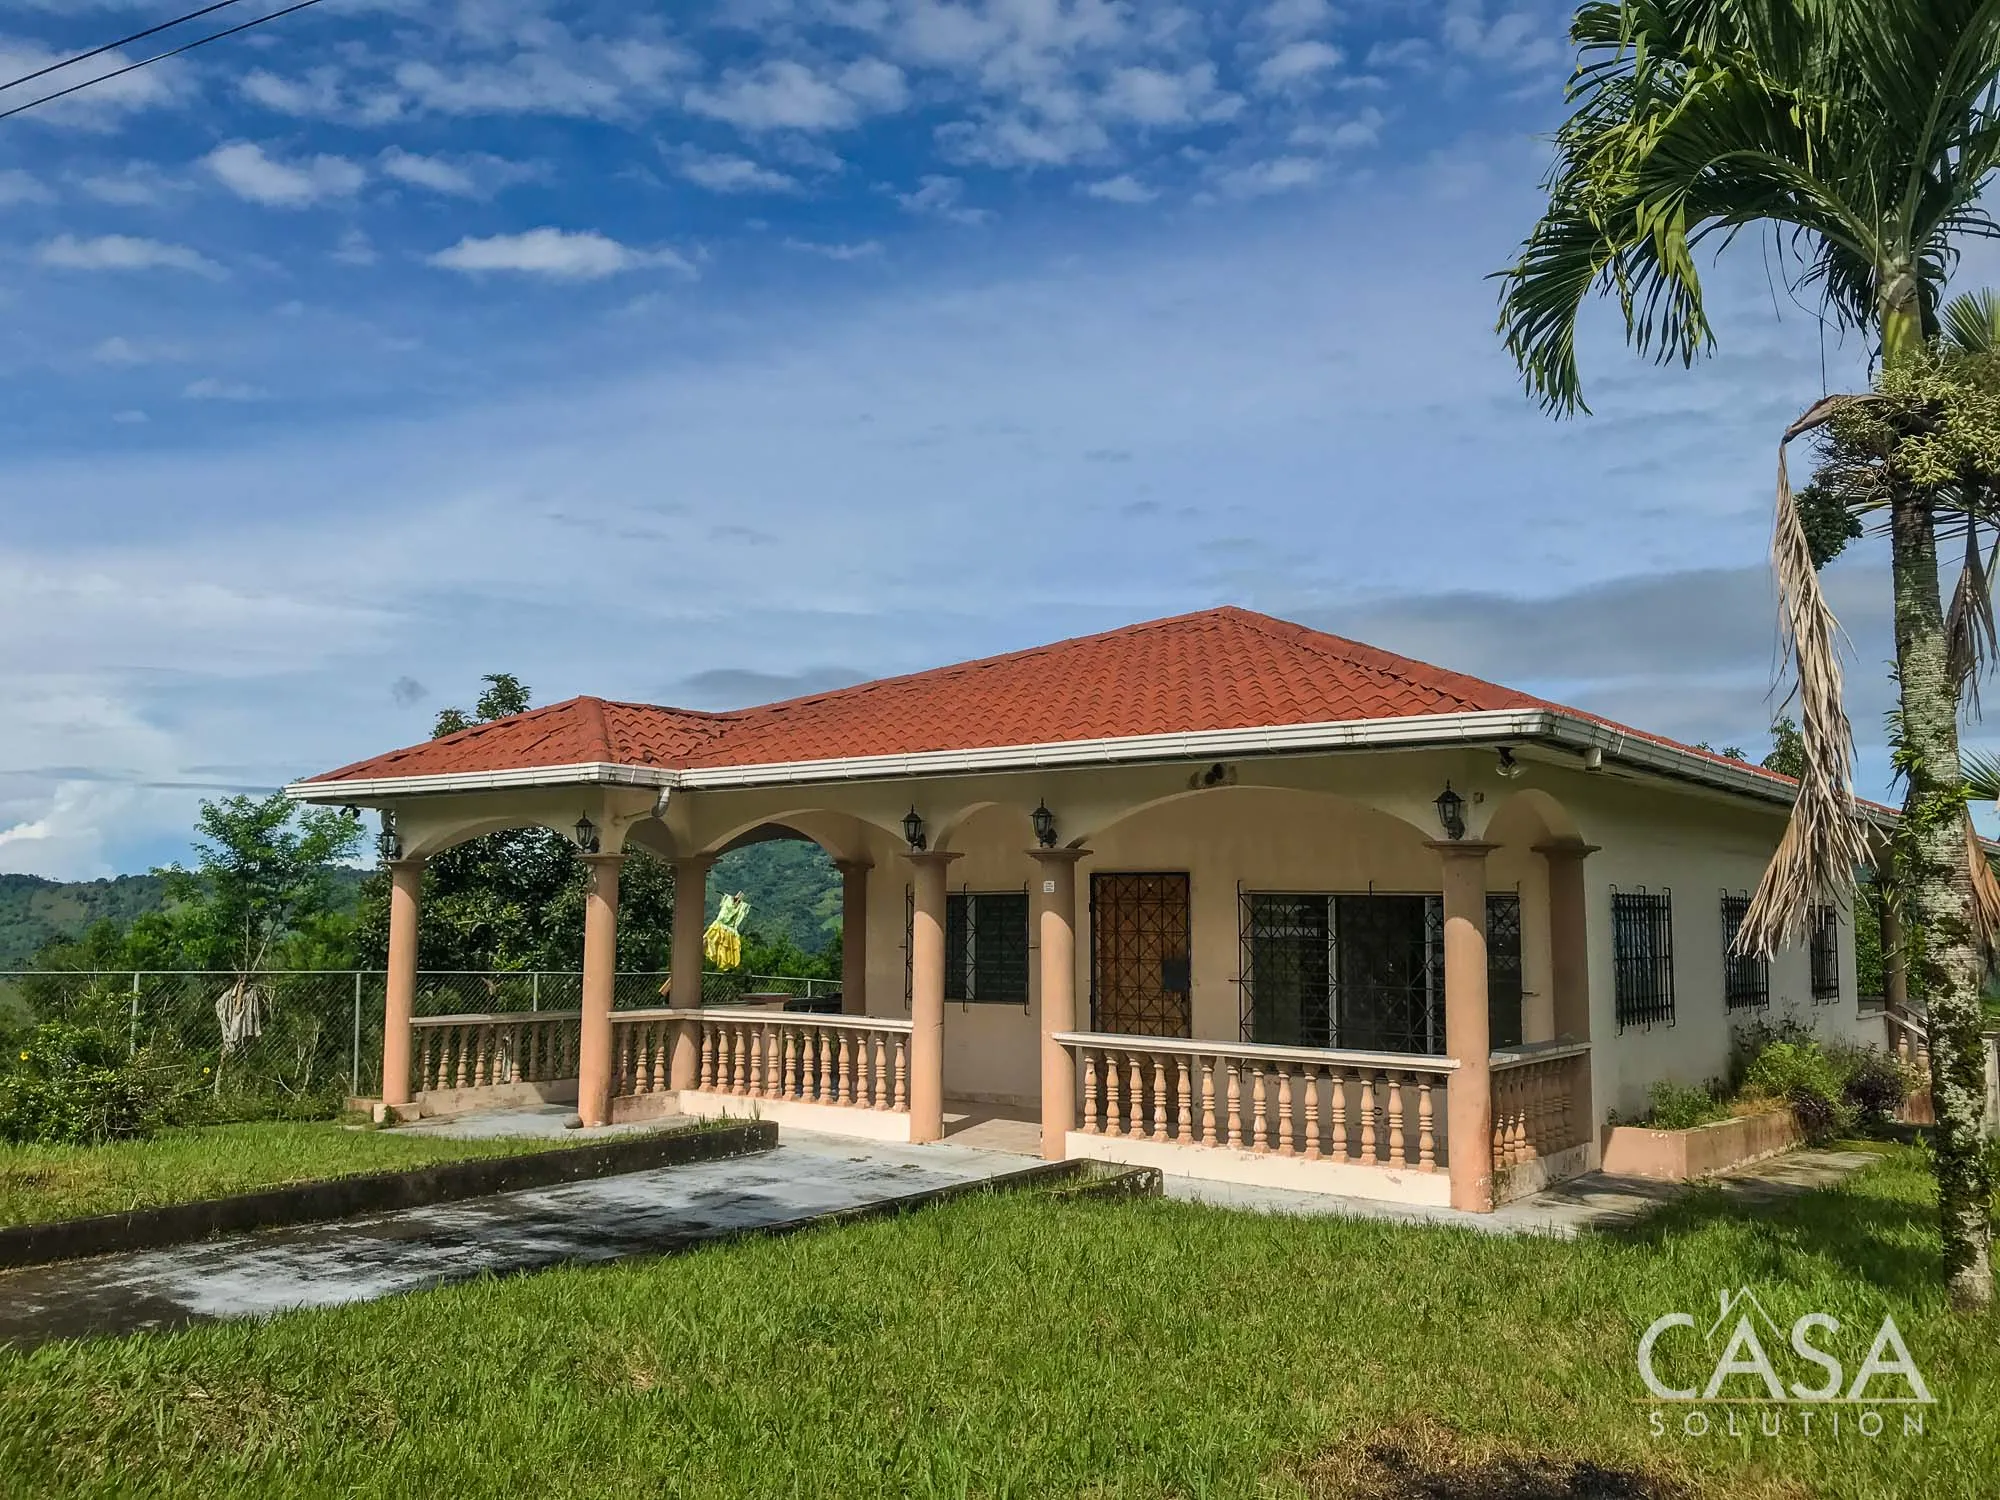 3-bedroom home in Renacimiento, Chiriqui, with 1.5 hectares of fertile land, a water spring, and mountain views.